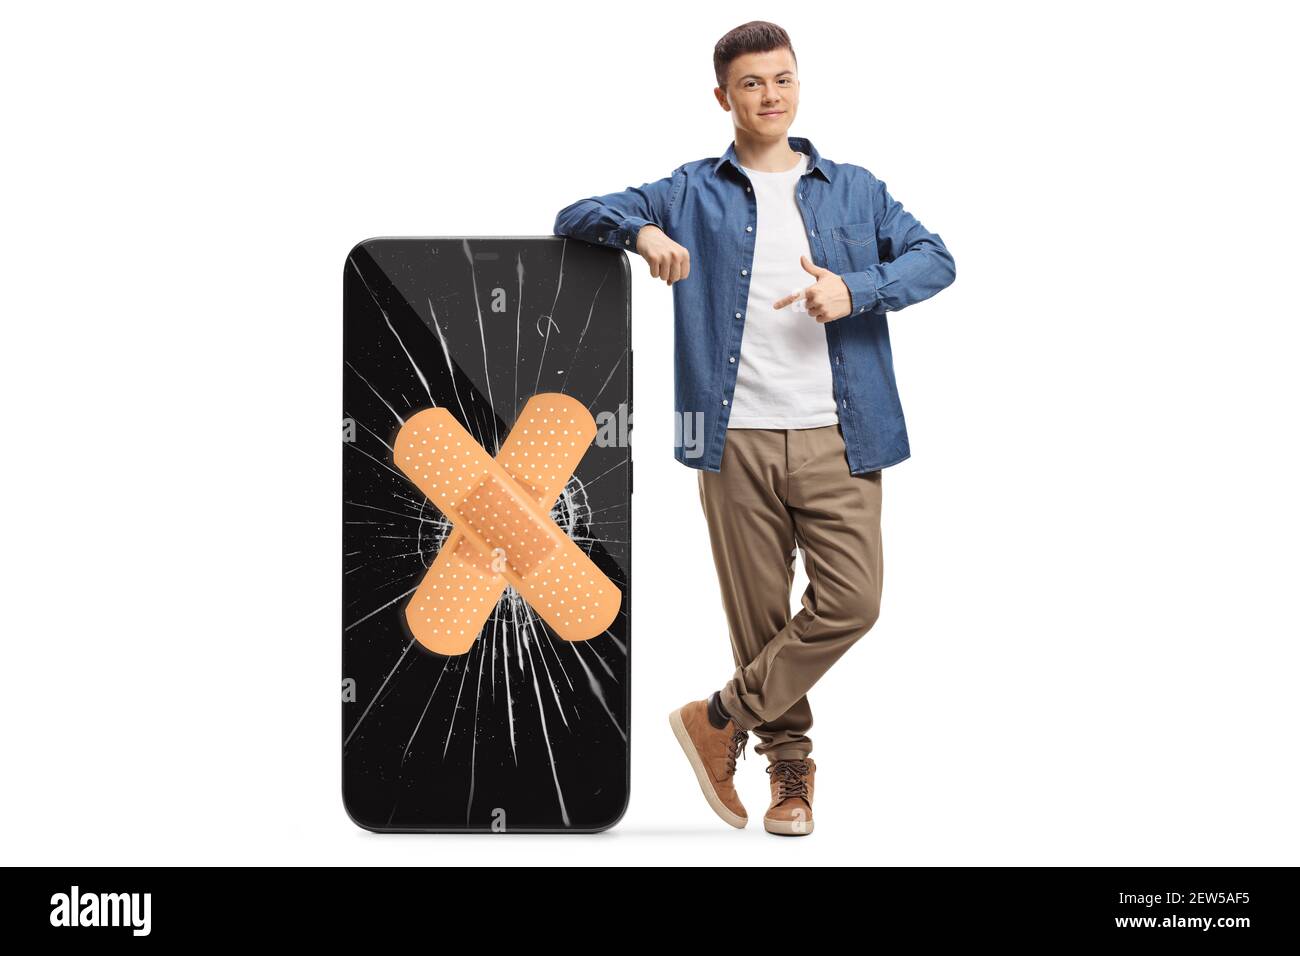 Full length portrait of a guy pointing at a smartphone with broken screen and bandage isolated on white background Stock Photo